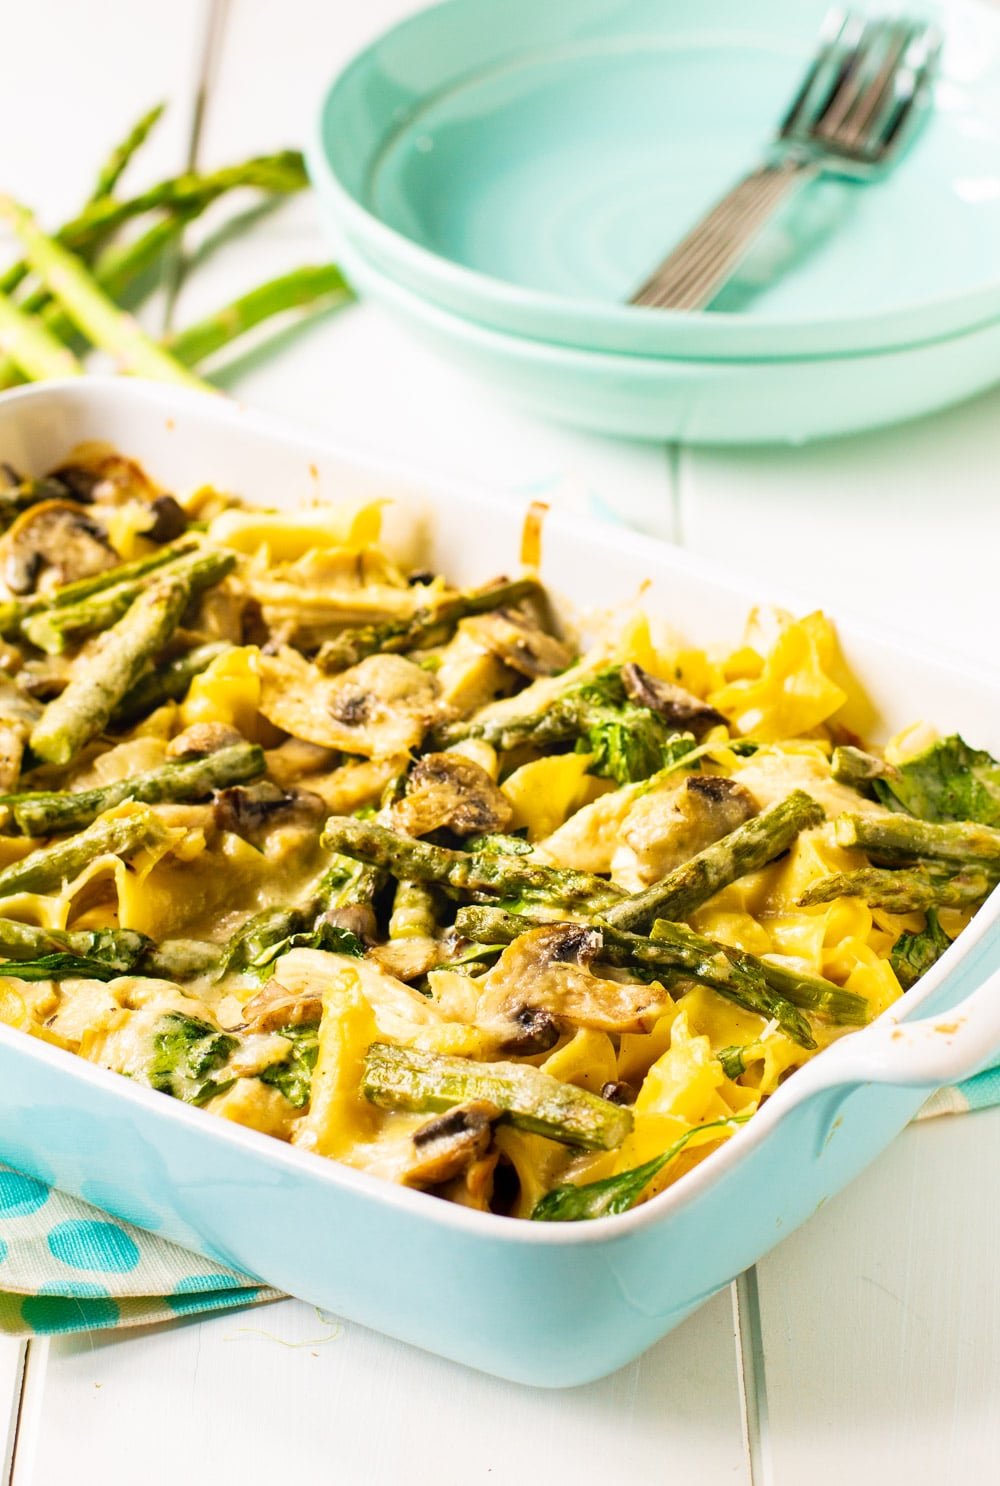 Chicken Casserole with asparagus in a baking dish.